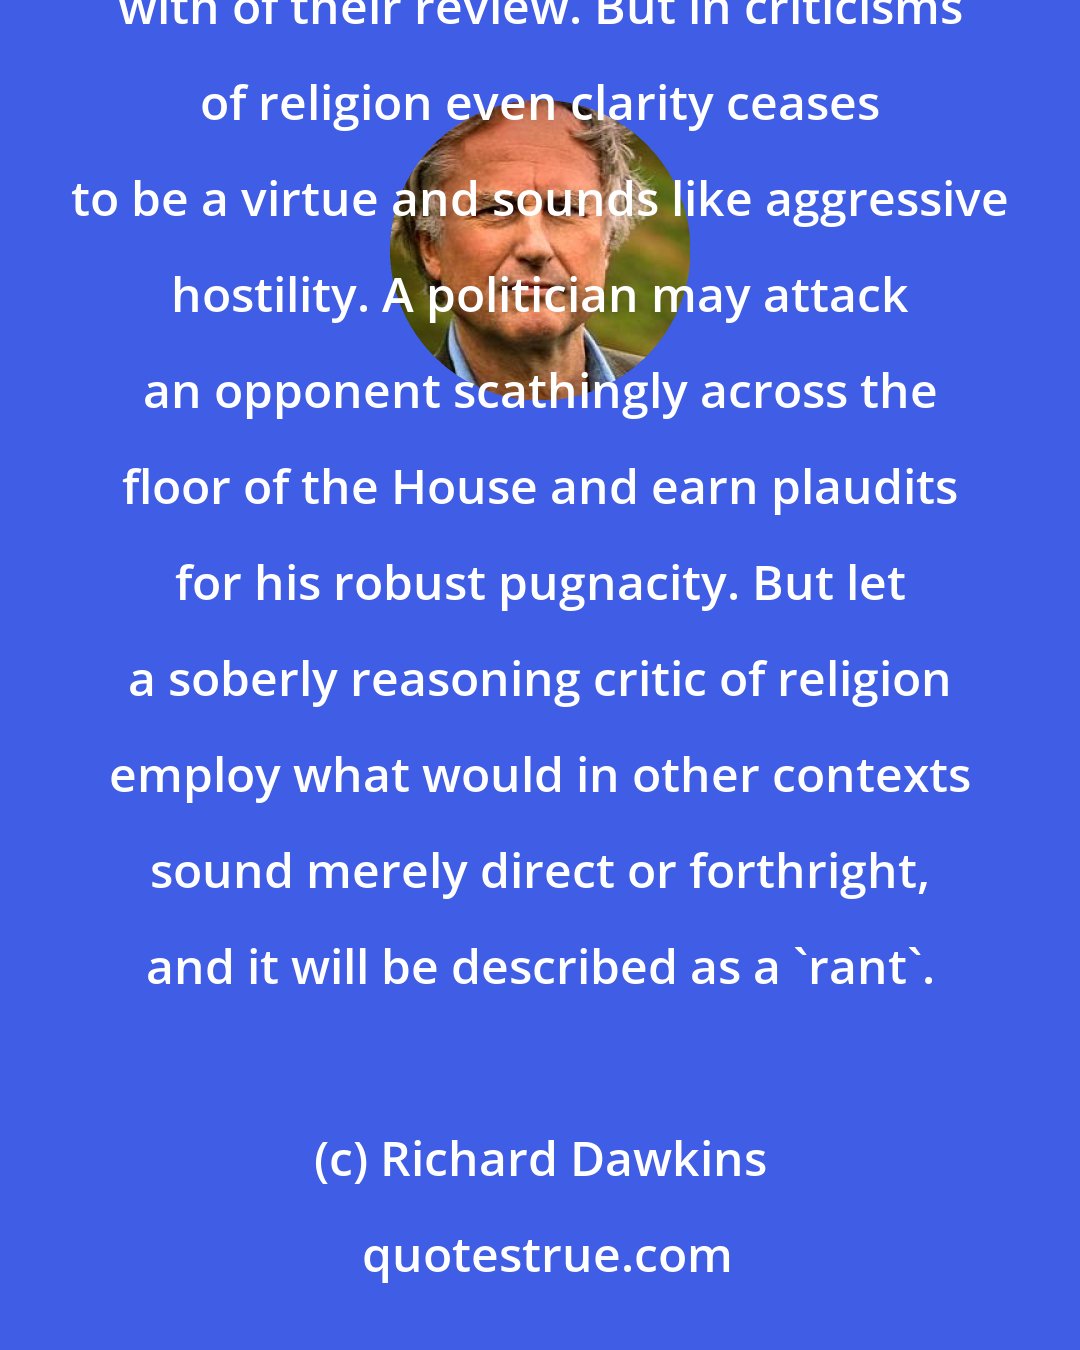 Richard Dawkins: Book critics or theatre critics can be derisively negative and gain delighted praise for the trenchant with of their review. But in criticisms of religion even clarity ceases to be a virtue and sounds like aggressive hostility. A politician may attack an opponent scathingly across the floor of the House and earn plaudits for his robust pugnacity. But let a soberly reasoning critic of religion employ what would in other contexts sound merely direct or forthright, and it will be described as a 'rant'.